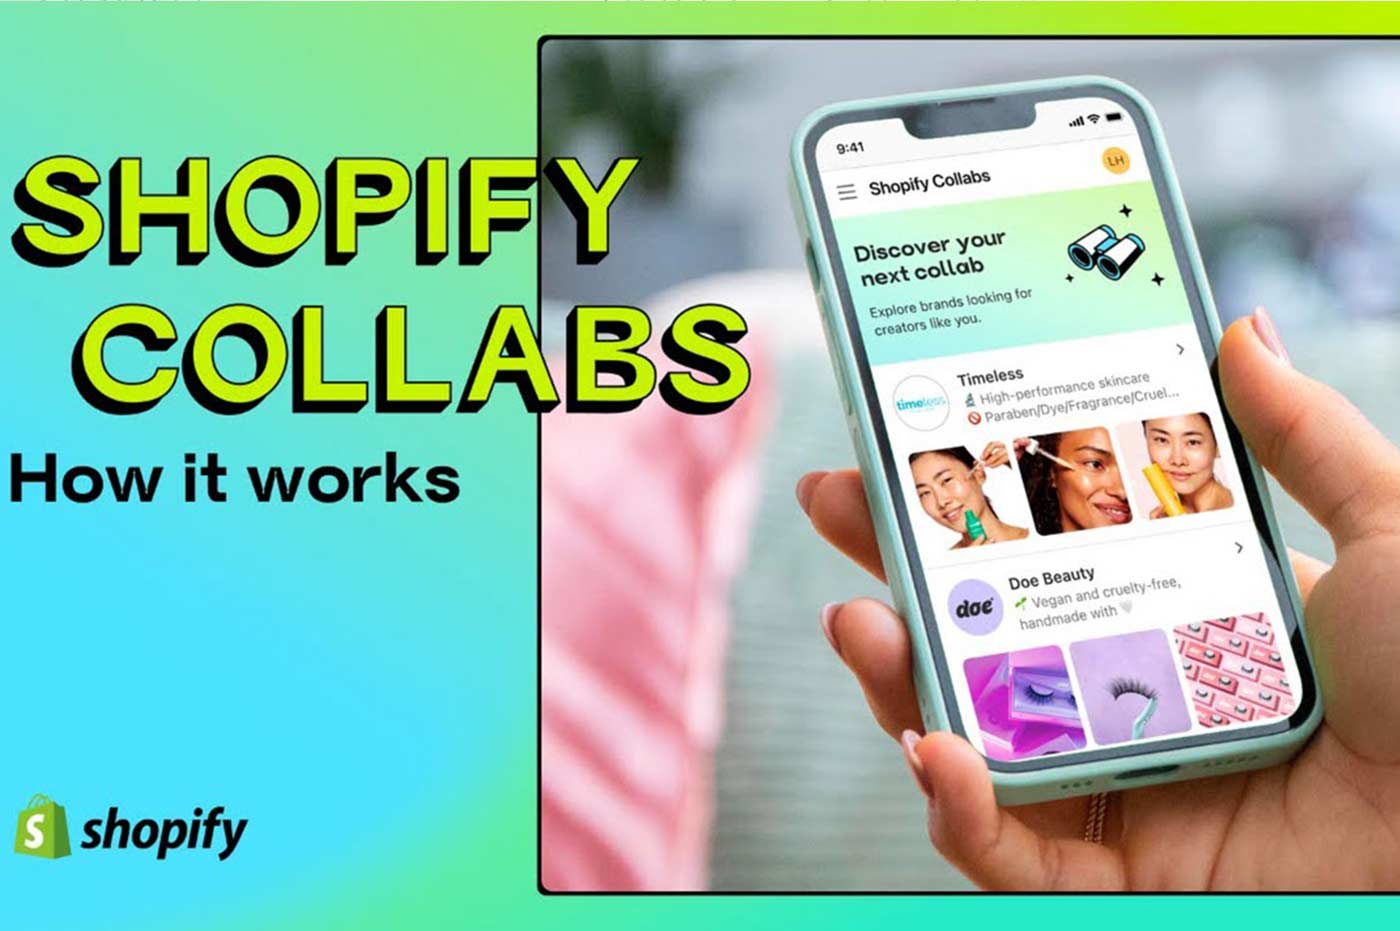 Shopify Collabs: Expanding your reach through partnerships